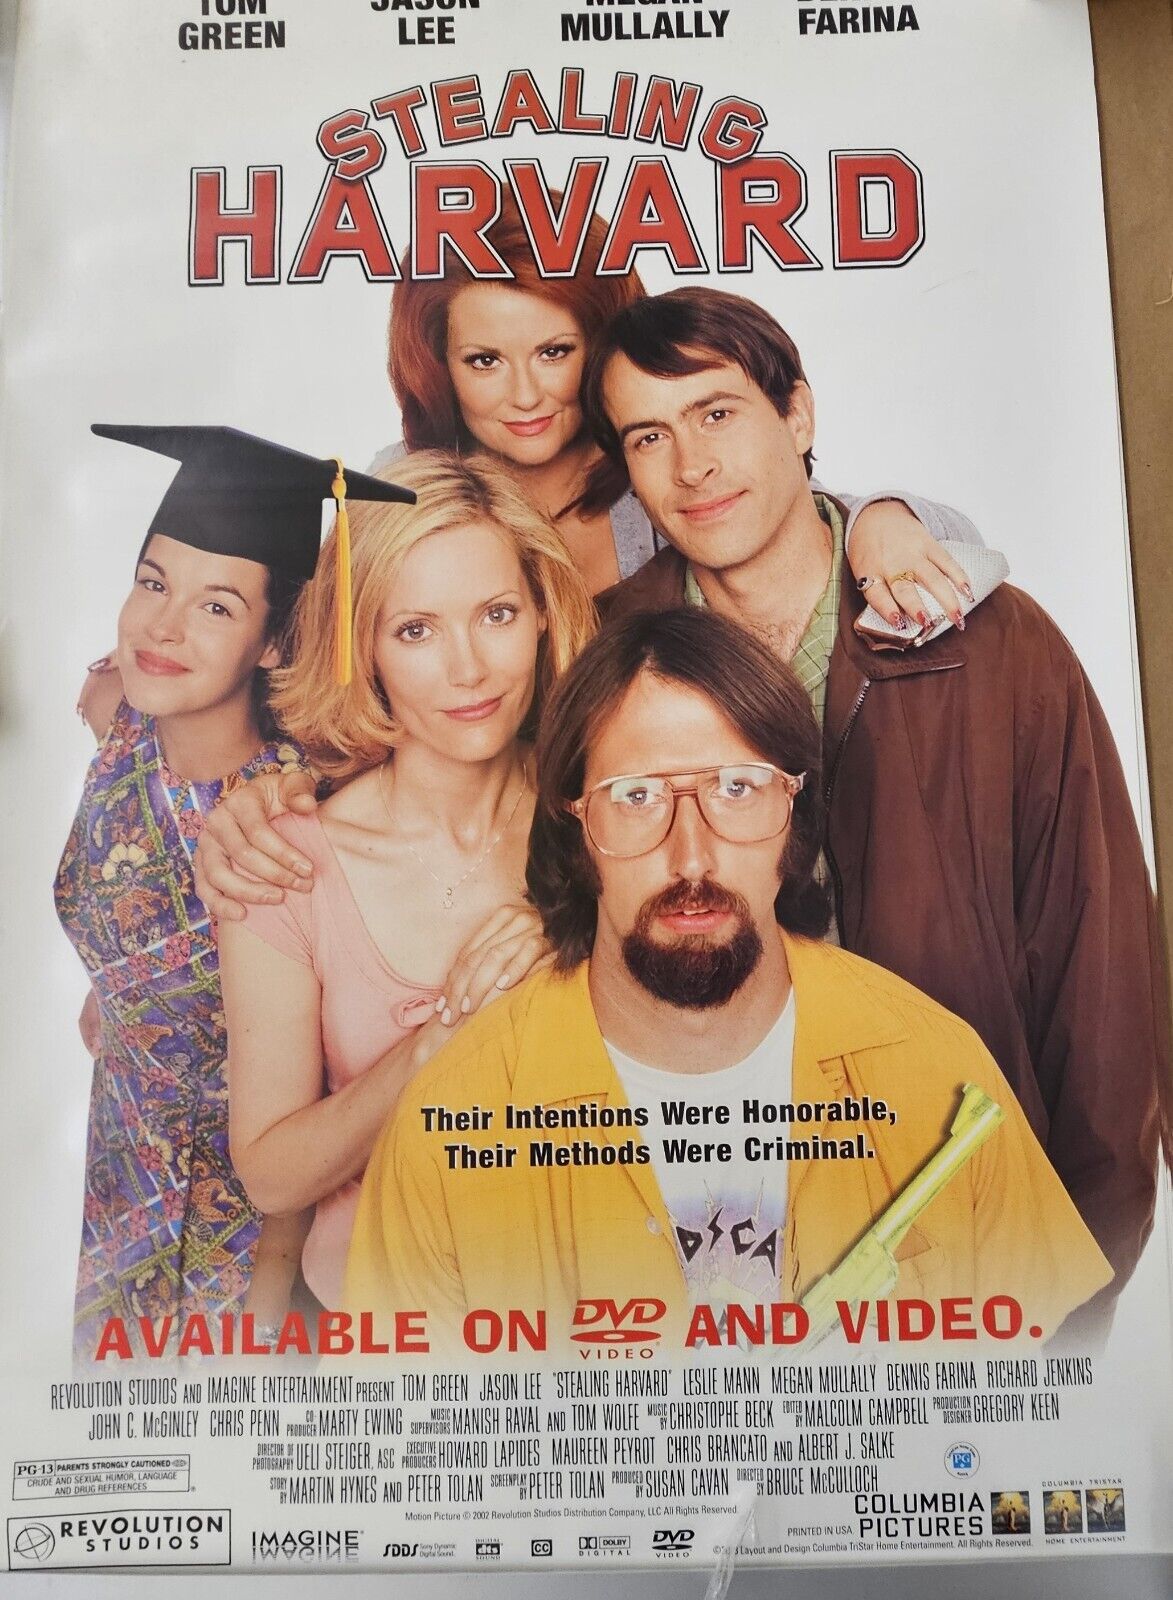 Tom Green and Jason Lee in Stealing Harvard 27 x 40 DVD promotional Movie poster